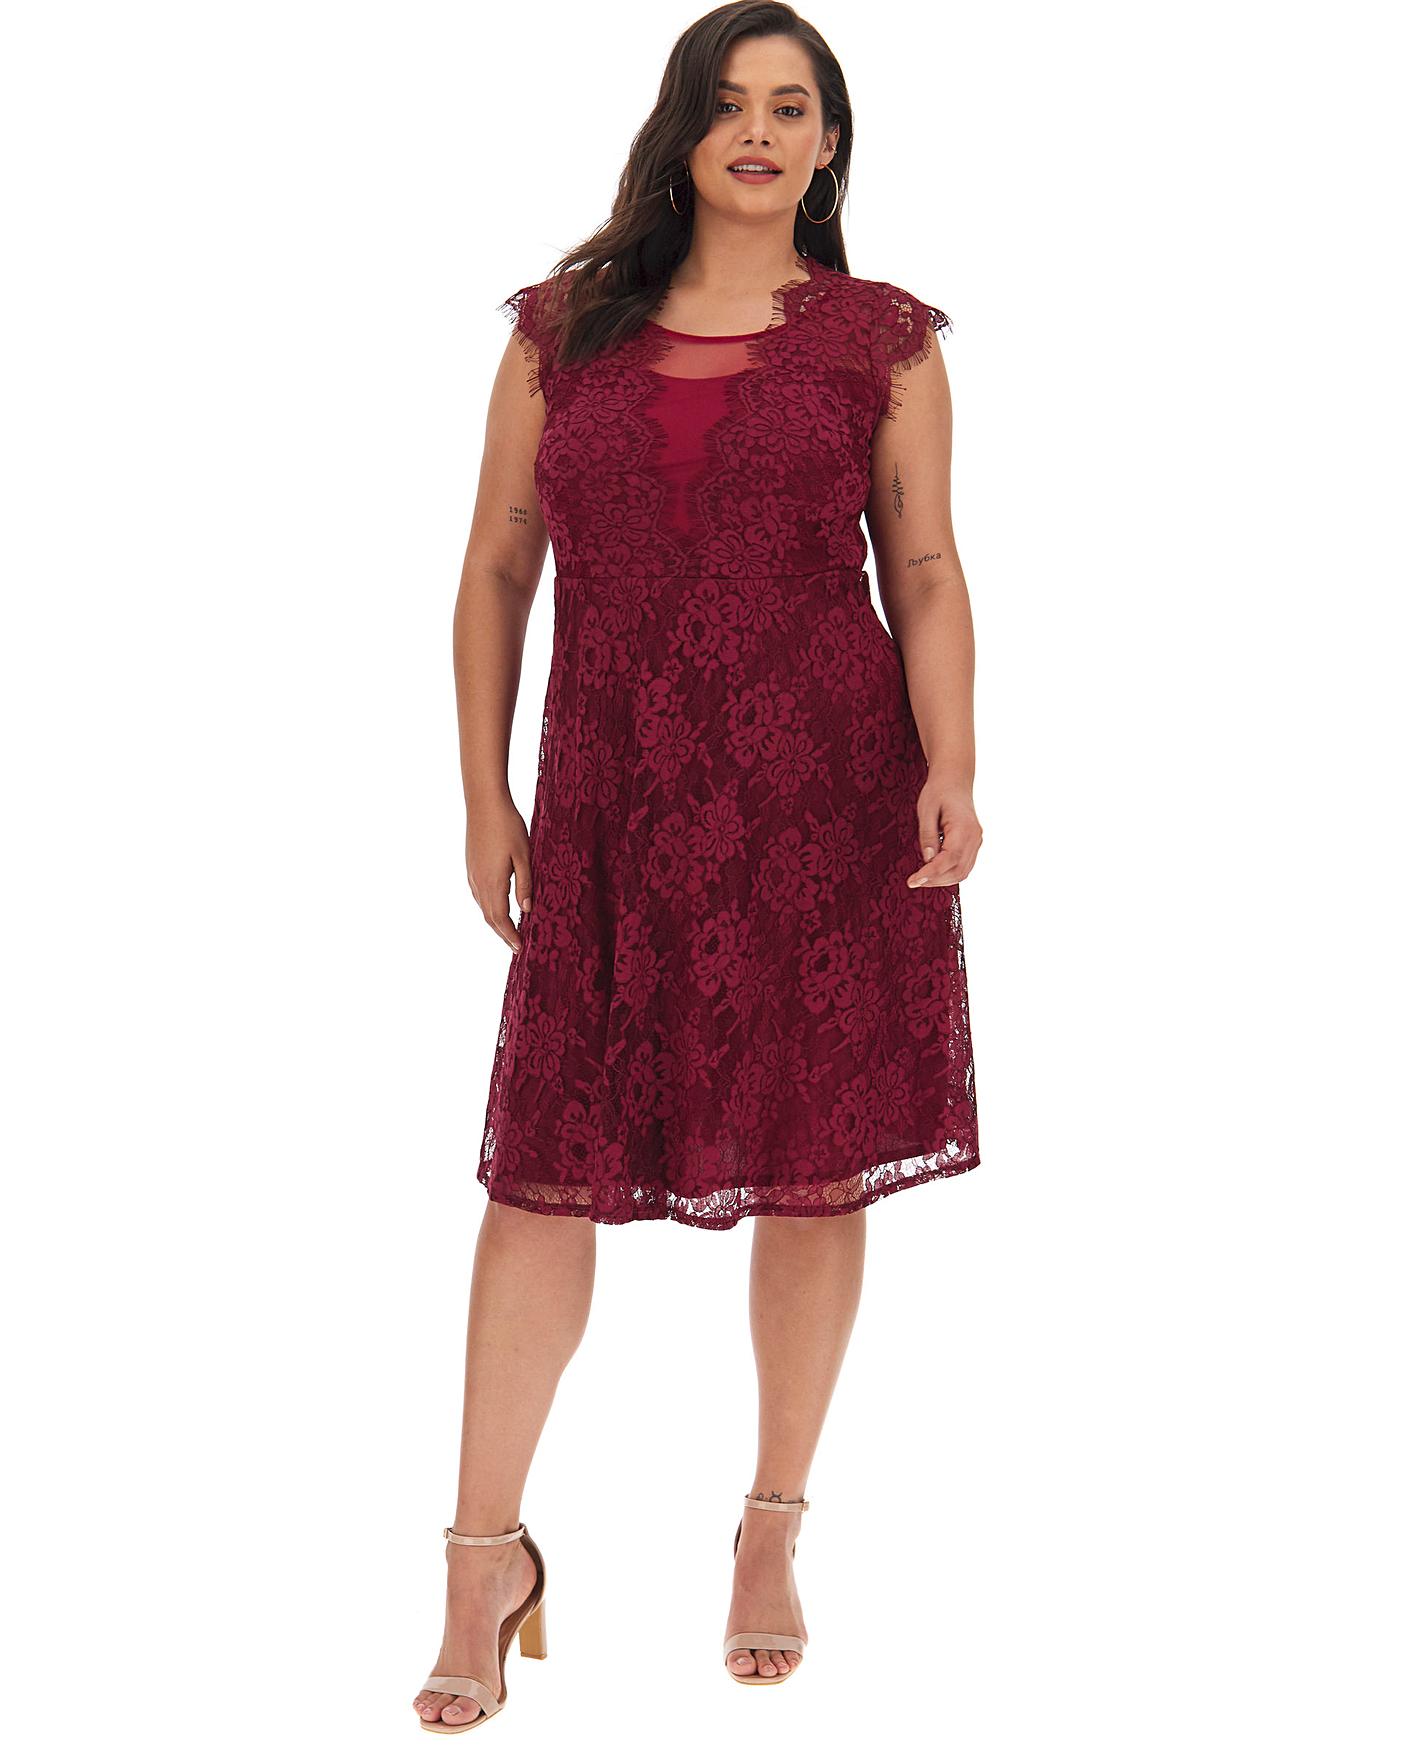 Joanna Hope Lace Fit N Flare Dress | Simply Be